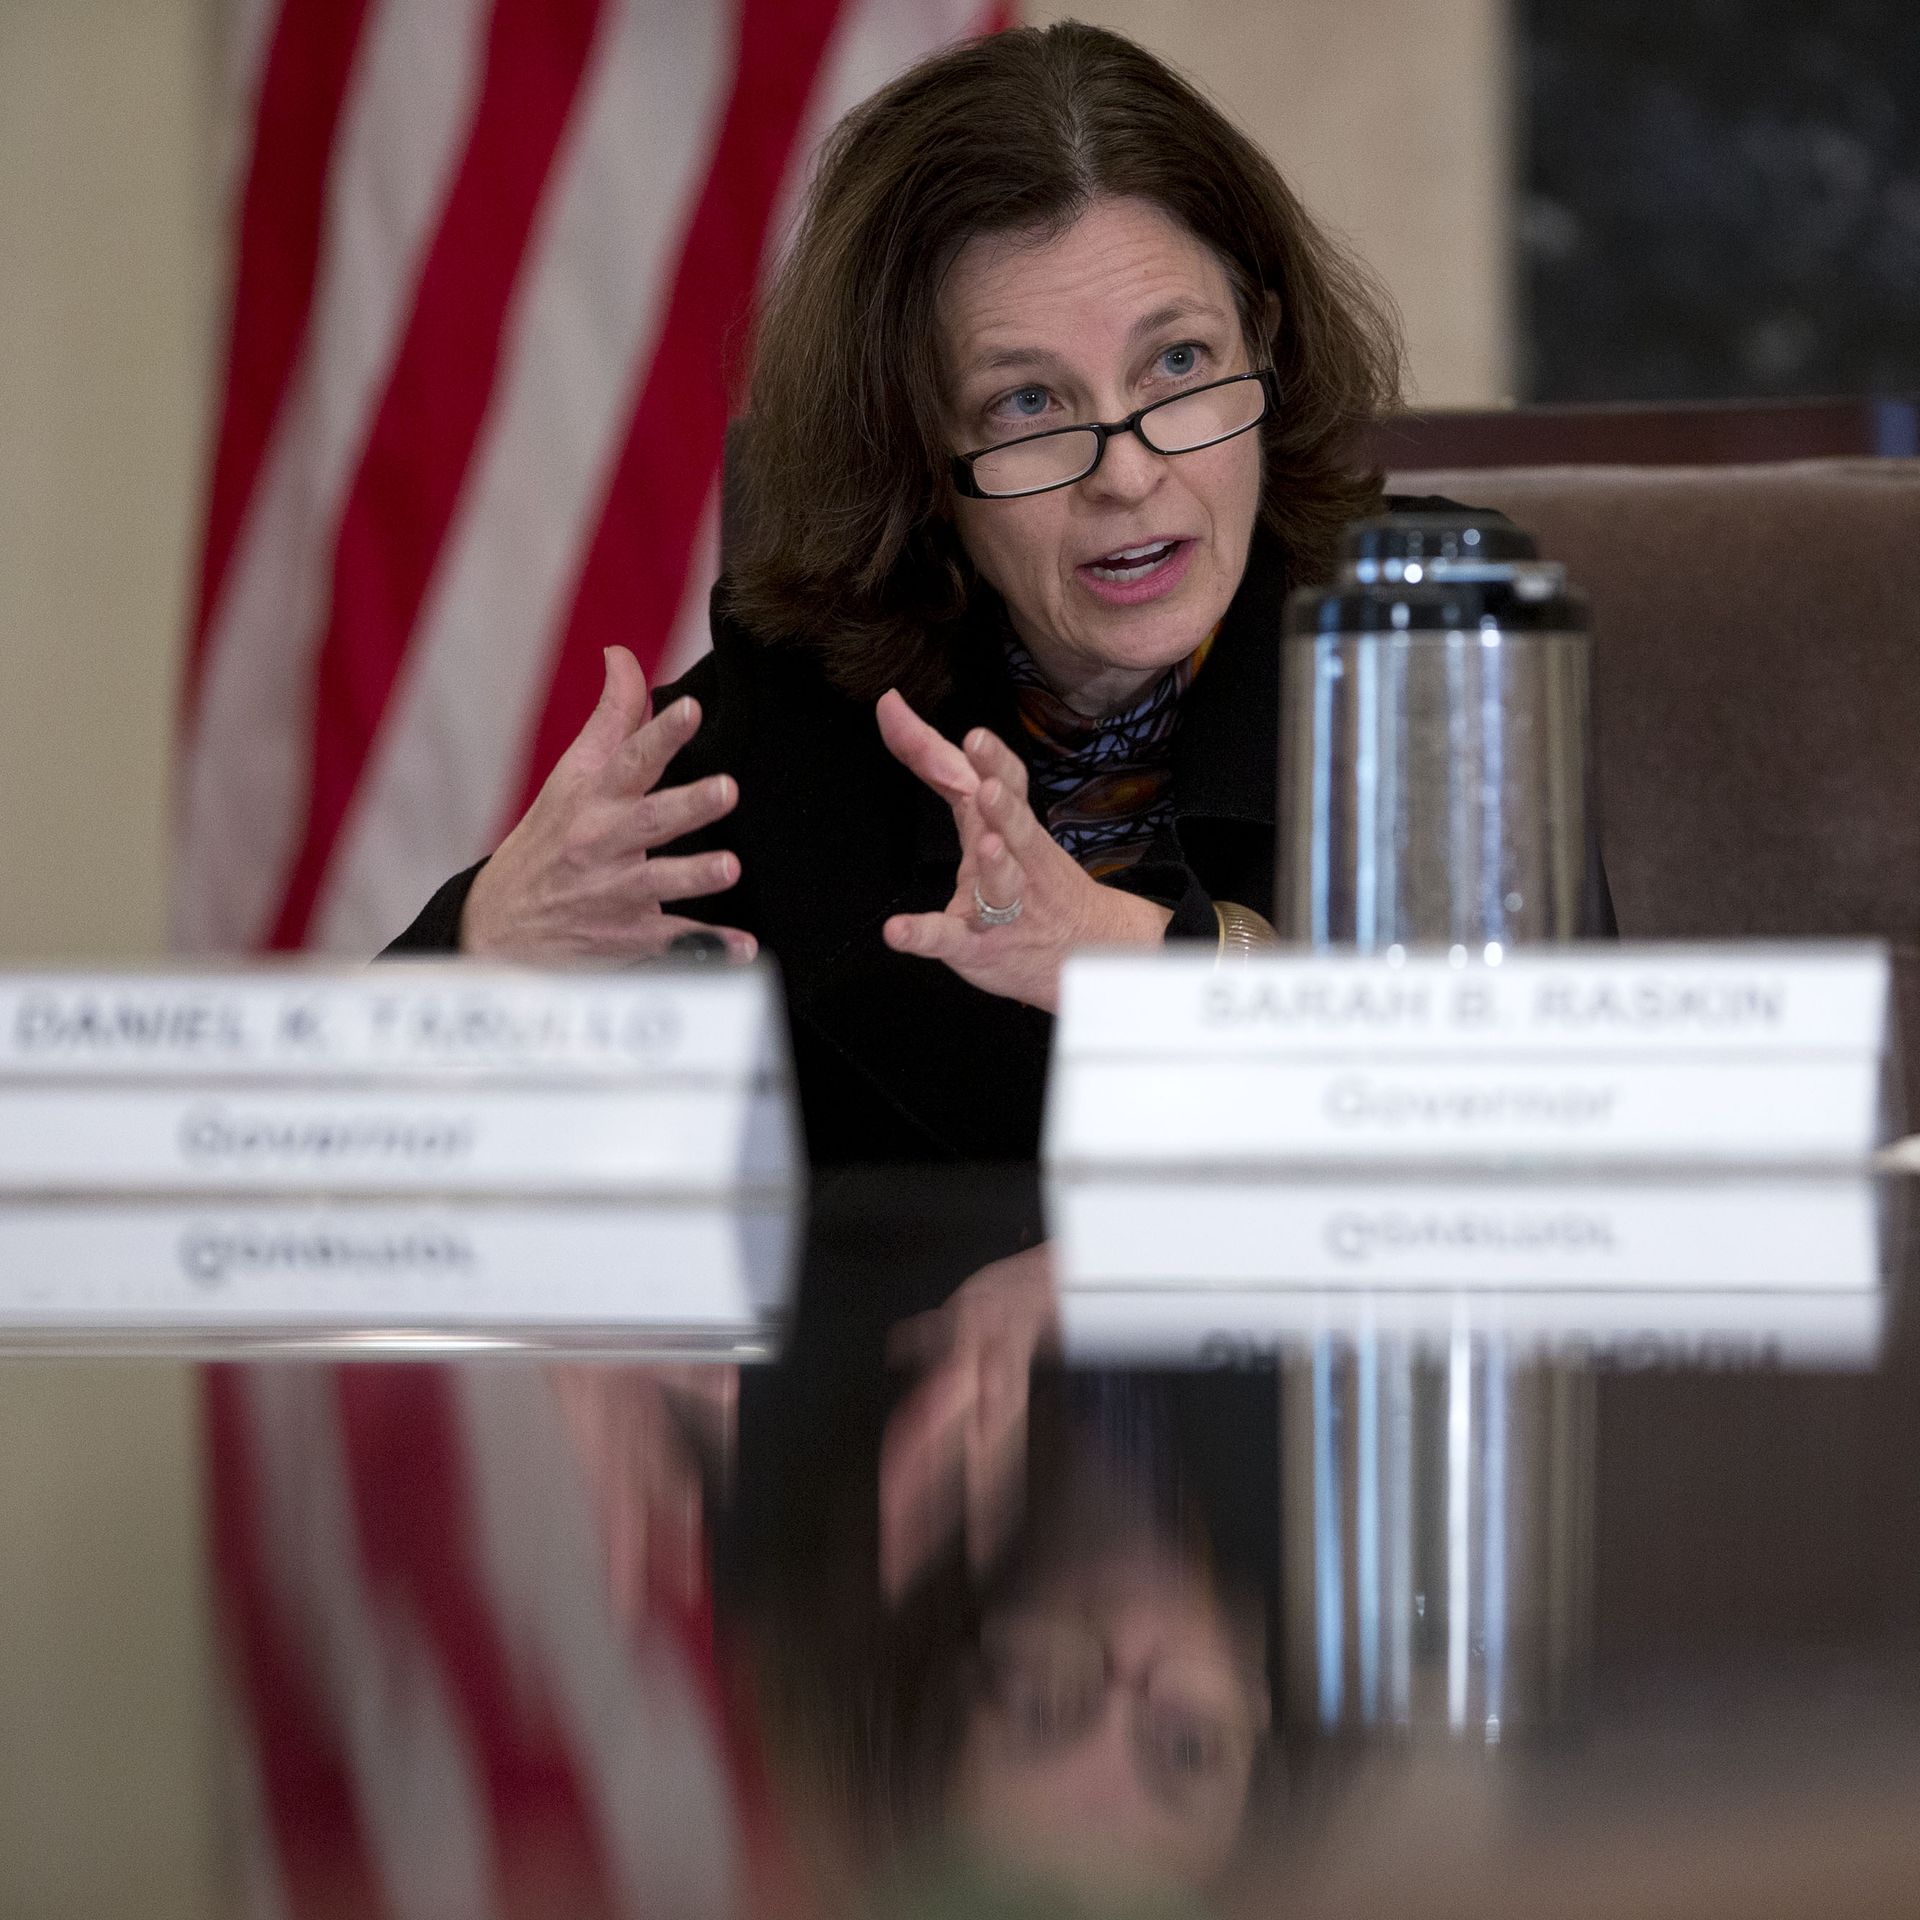 Sarah Bloom Raskin, governor of the U.S. Federal Reserve, speaks during an open meeting of the Board of Governors of the Federal Reserve in Washington